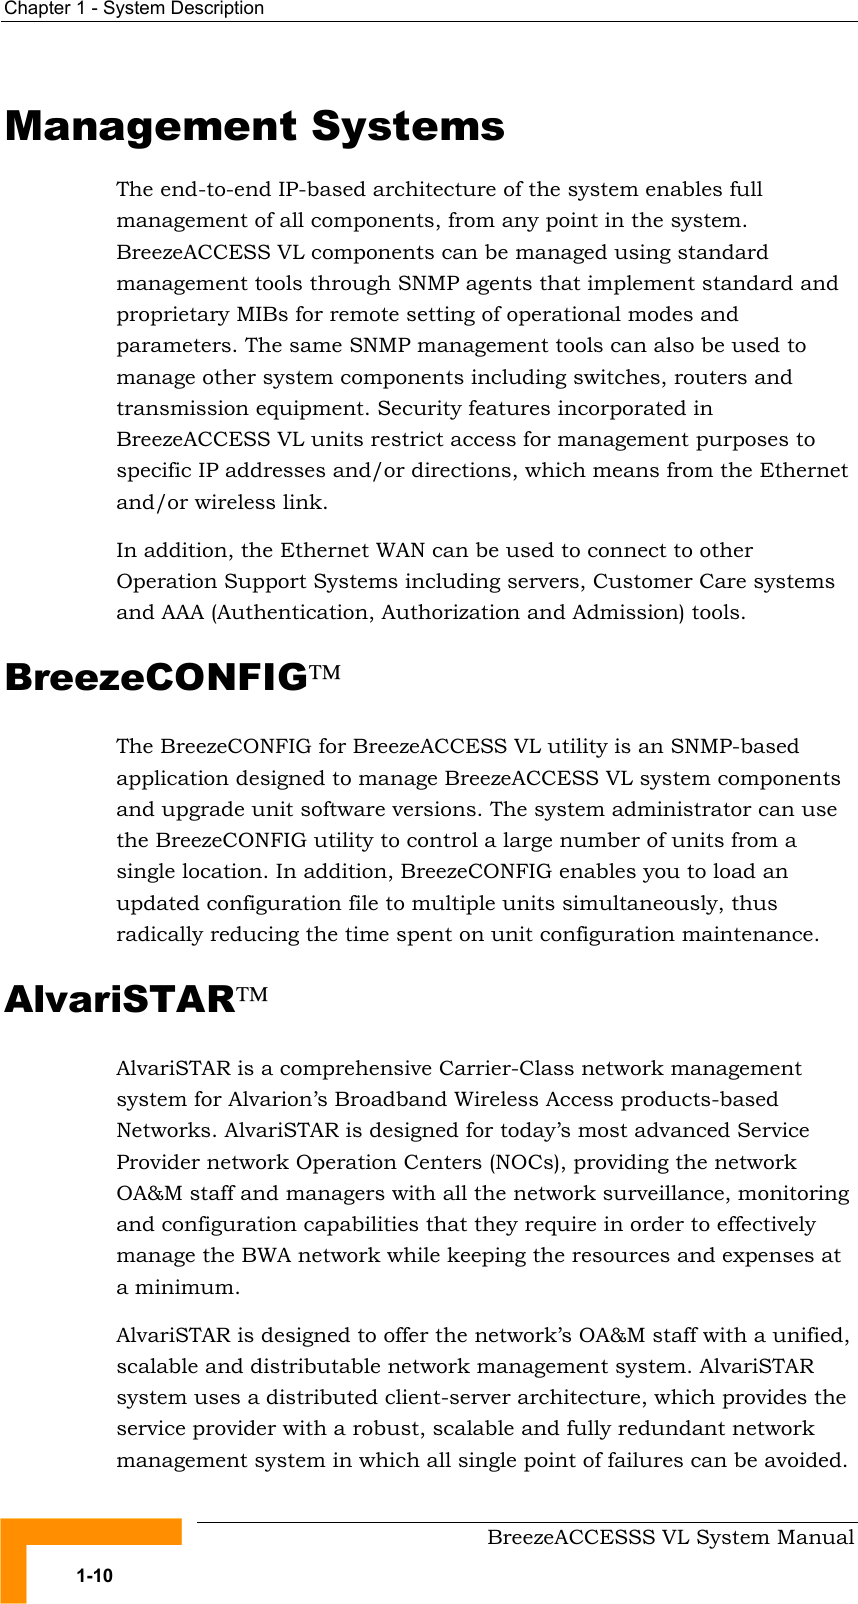 Chapter  1 - System Description     BreezeACCESSS VL System Manual 1-10 Management Systems The end-to-end IP-based architecture of the system enables full management of all components, from any point in the system. BreezeACCESS VL components can be managed using standard management tools through SNMP agents that implement standard and proprietary MIBs for remote setting of operational modes and parameters. The same SNMP management tools can also be used to manage other system components including switches, routers and transmission equipment. Security features incorporated in BreezeACCESS VL units restrict access for management purposes to specific IP addresses and/or directions, which means from the Ethernet and/or wireless link. In addition, the Ethernet WAN can be used to connect to other Operation Support Systems including servers, Customer Care systems and AAA (Authentication, Authorization and Admission) tools. BreezeCONFIG  The BreezeCONFIG for BreezeACCESS VL utility is an SNMP-based application designed to manage BreezeACCESS VL system components and upgrade unit software versions. The system administrator can use the BreezeCONFIG utility to control a large number of units from a single location. In addition, BreezeCONFIG enables you to load an updated configuration file to multiple units simultaneously, thus radically reducing the time spent on unit configuration maintenance. AlvariSTAR AlvariSTAR is a comprehensive Carrier-Class network management system for Alvarion’s Broadband Wireless Access products-based Networks. AlvariSTAR is designed for today’s most advanced Service Provider network Operation Centers (NOCs), providing the network OA&amp;M staff and managers with all the network surveillance, monitoring and configuration capabilities that they require in order to effectively manage the BWA network while keeping the resources and expenses at a minimum. AlvariSTAR is designed to offer the network’s OA&amp;M staff with a unified, scalable and distributable network management system. AlvariSTAR system uses a distributed client-server architecture, which provides the service provider with a robust, scalable and fully redundant network management system in which all single point of failures can be avoided. 